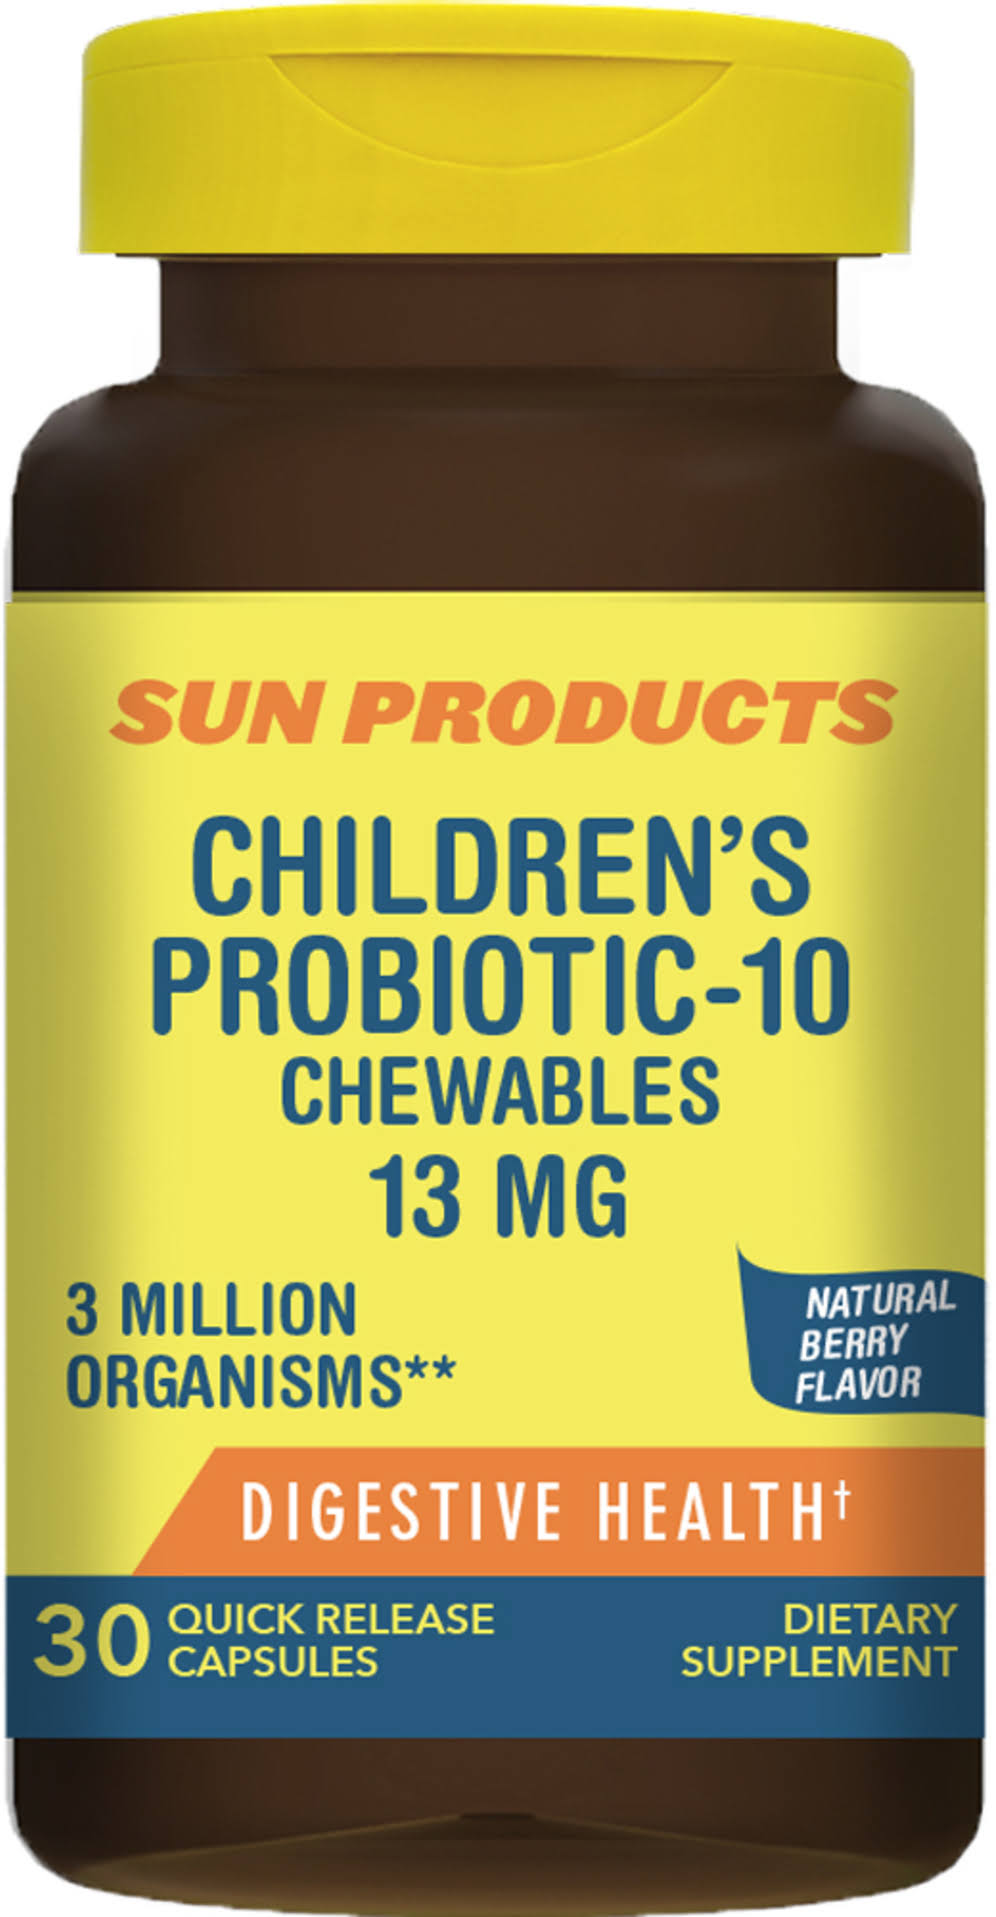 Sundance Kid S Probiotic Chewable Tablets Natural Berry